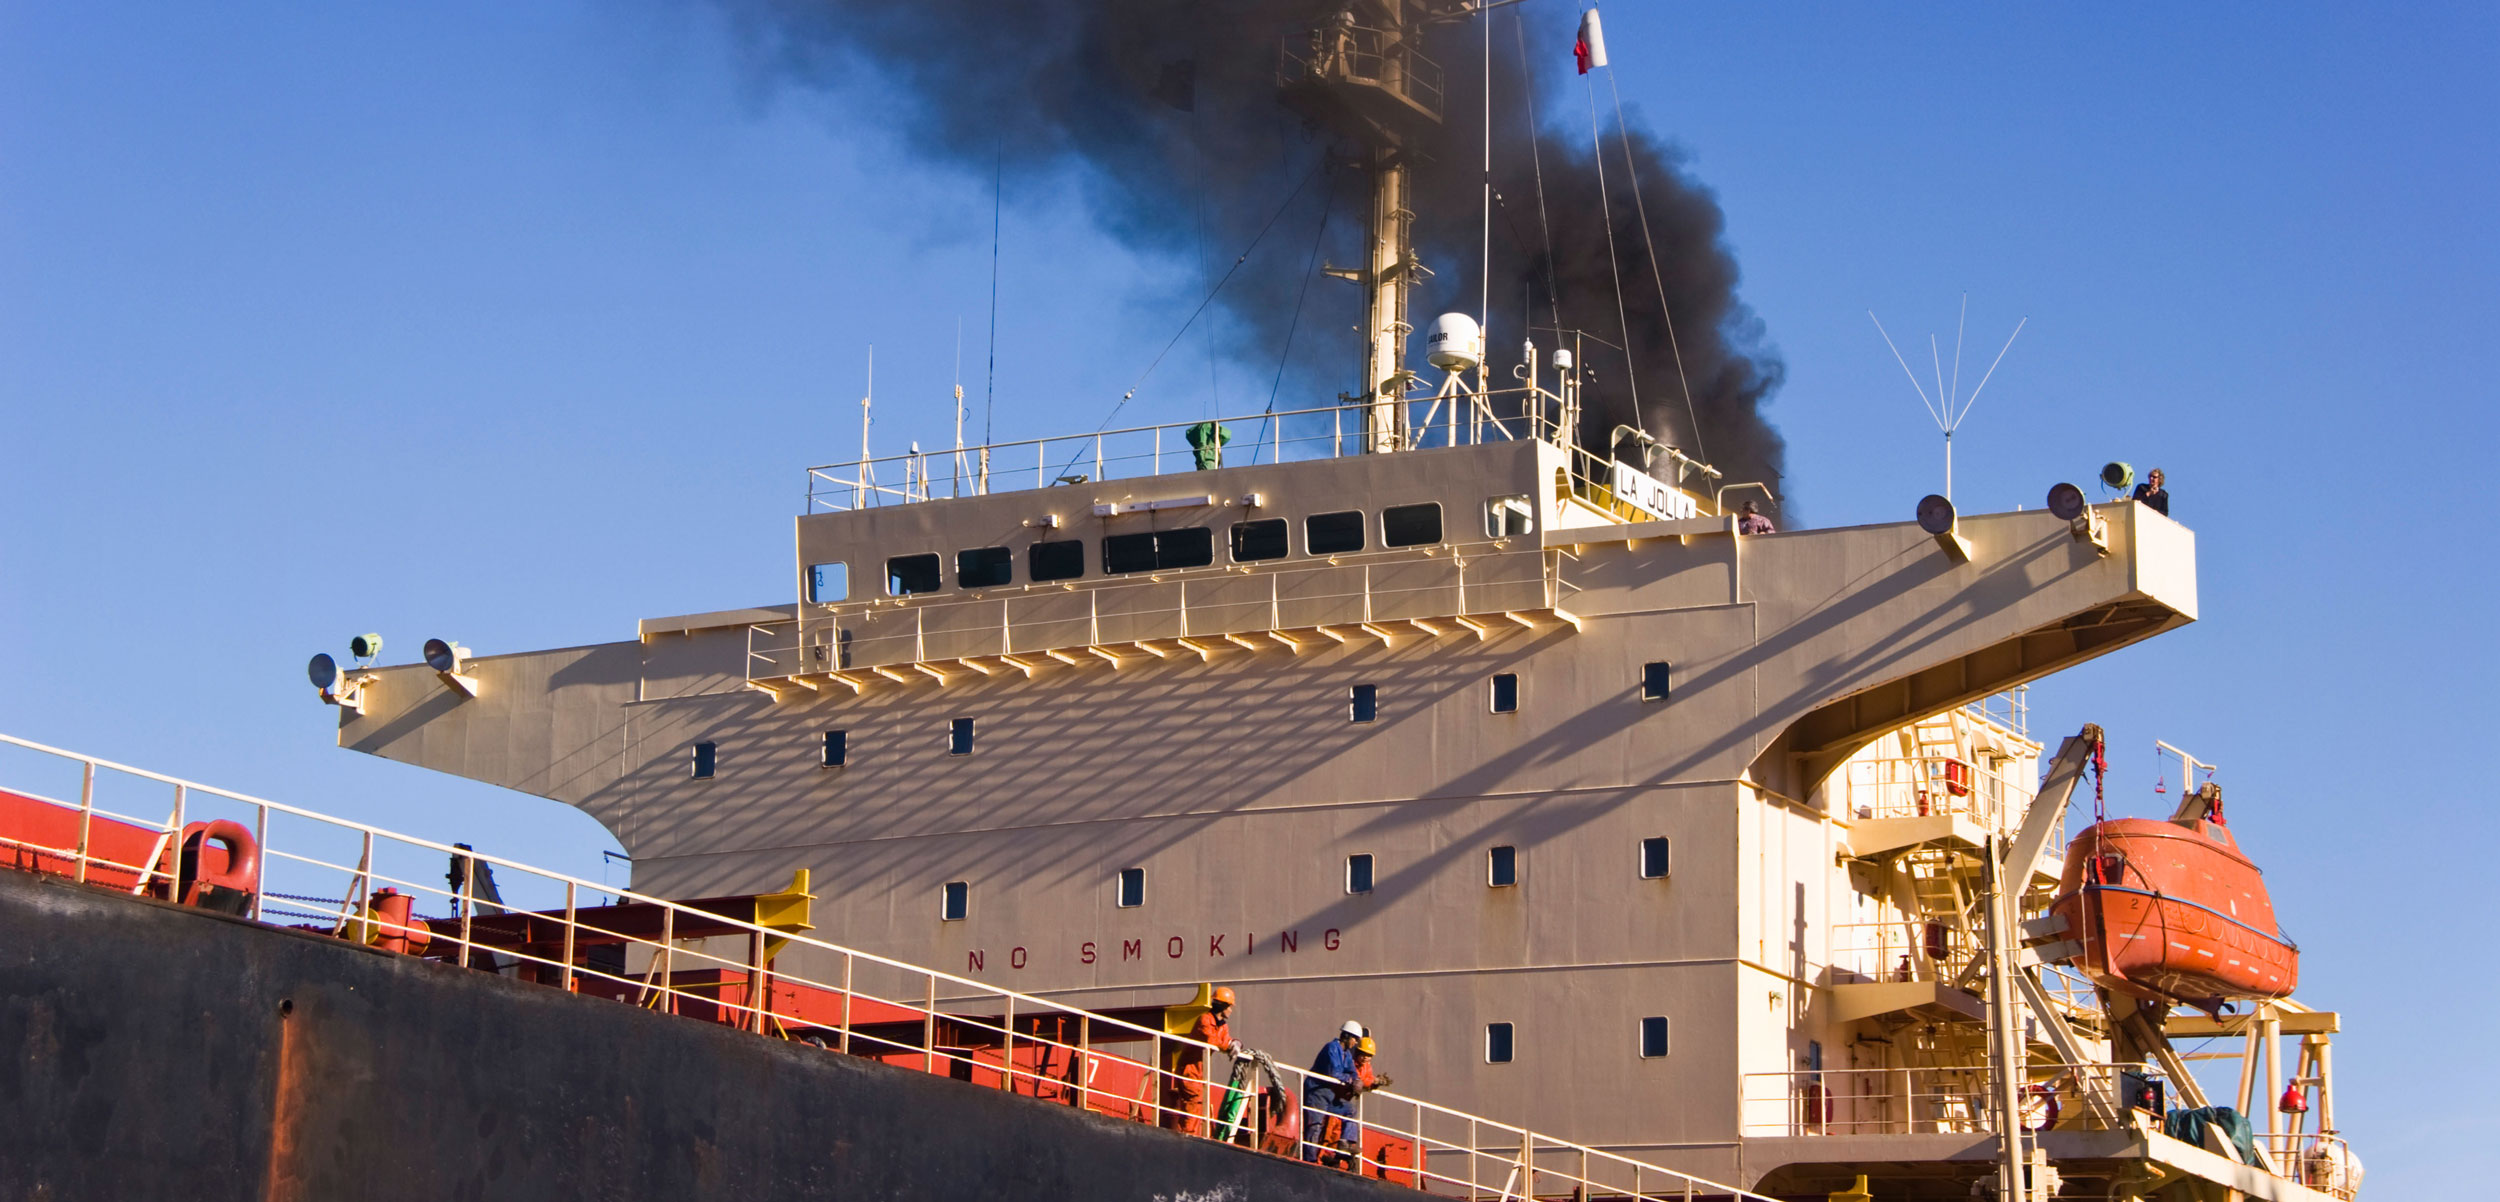 Black smoke rises from ship's funnel as the ship approaches the quay.